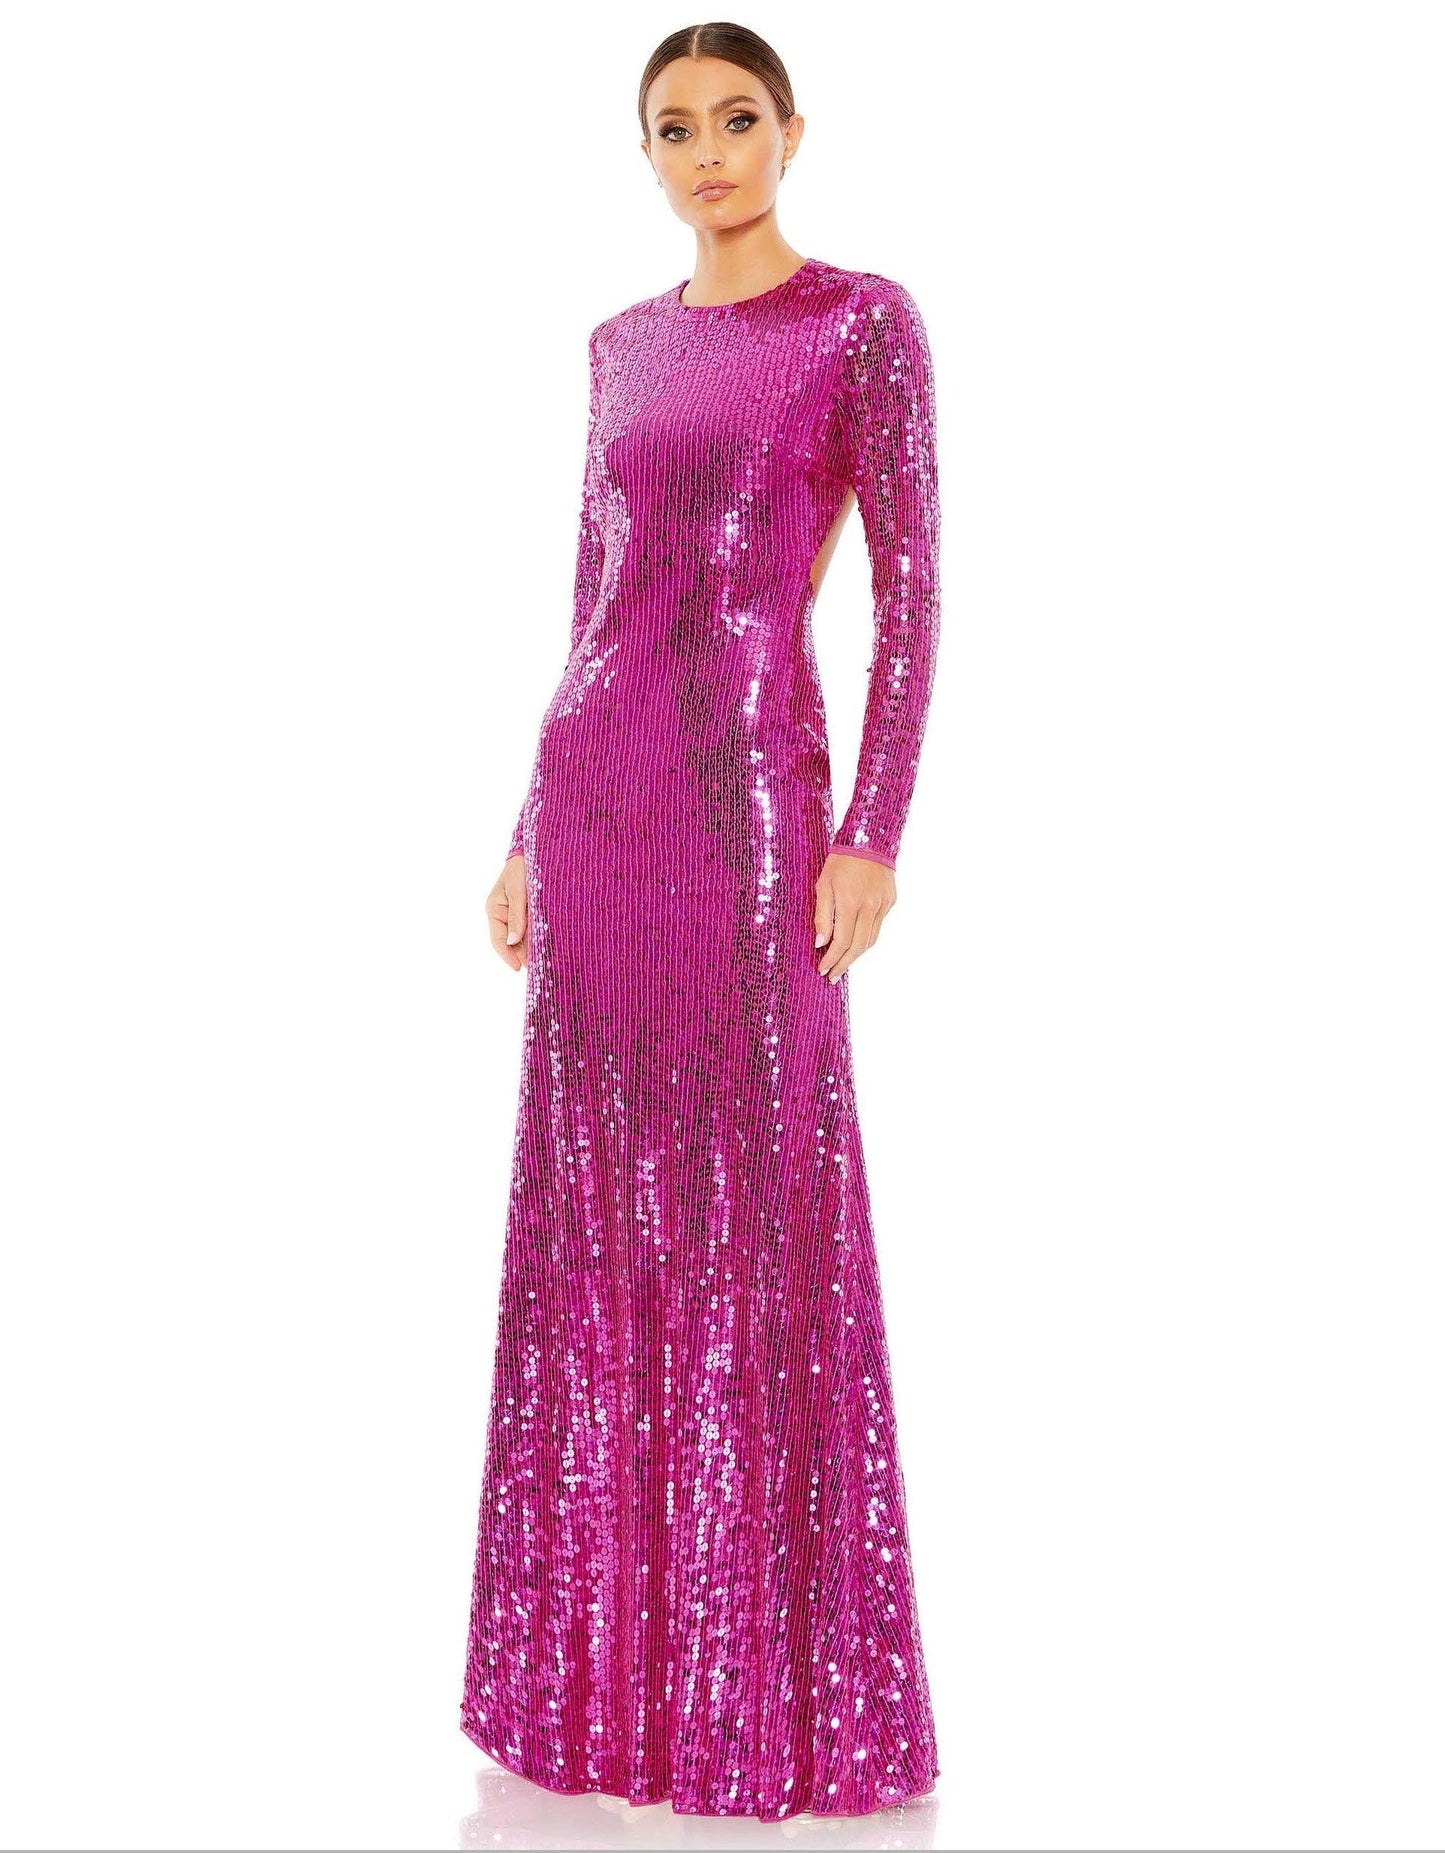 Mac Duggal Long Sleeve Formal Evening Gown 10891 - The Dress Outlet